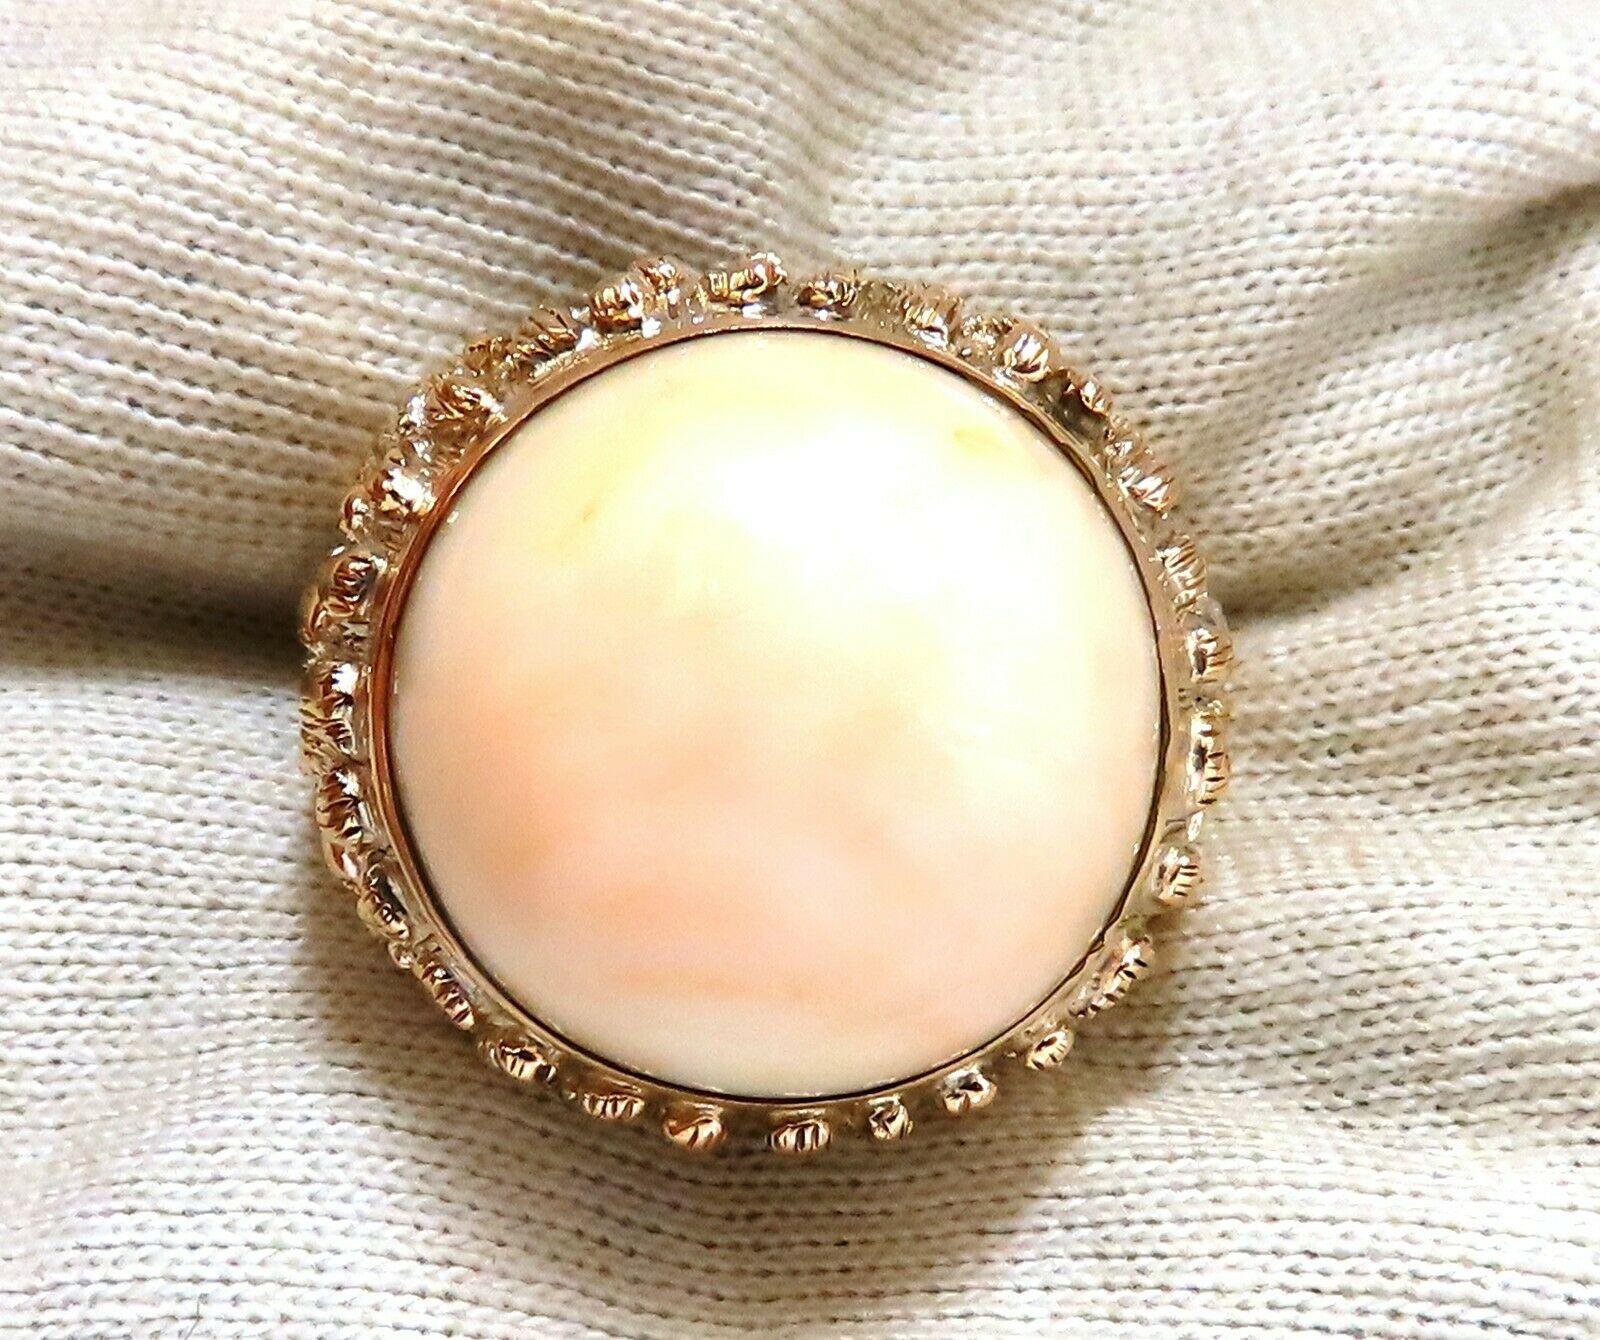 GIA certified Natural Coral Vintage ring.

20 x 20mm

Light orange pink.

No dye, no enhancements.

Ring measures:

13mm depth

25mm wide.

14kt yellow gold.

20.2 grams

Size 8.75

$7000 appraisal & GIA to accompany